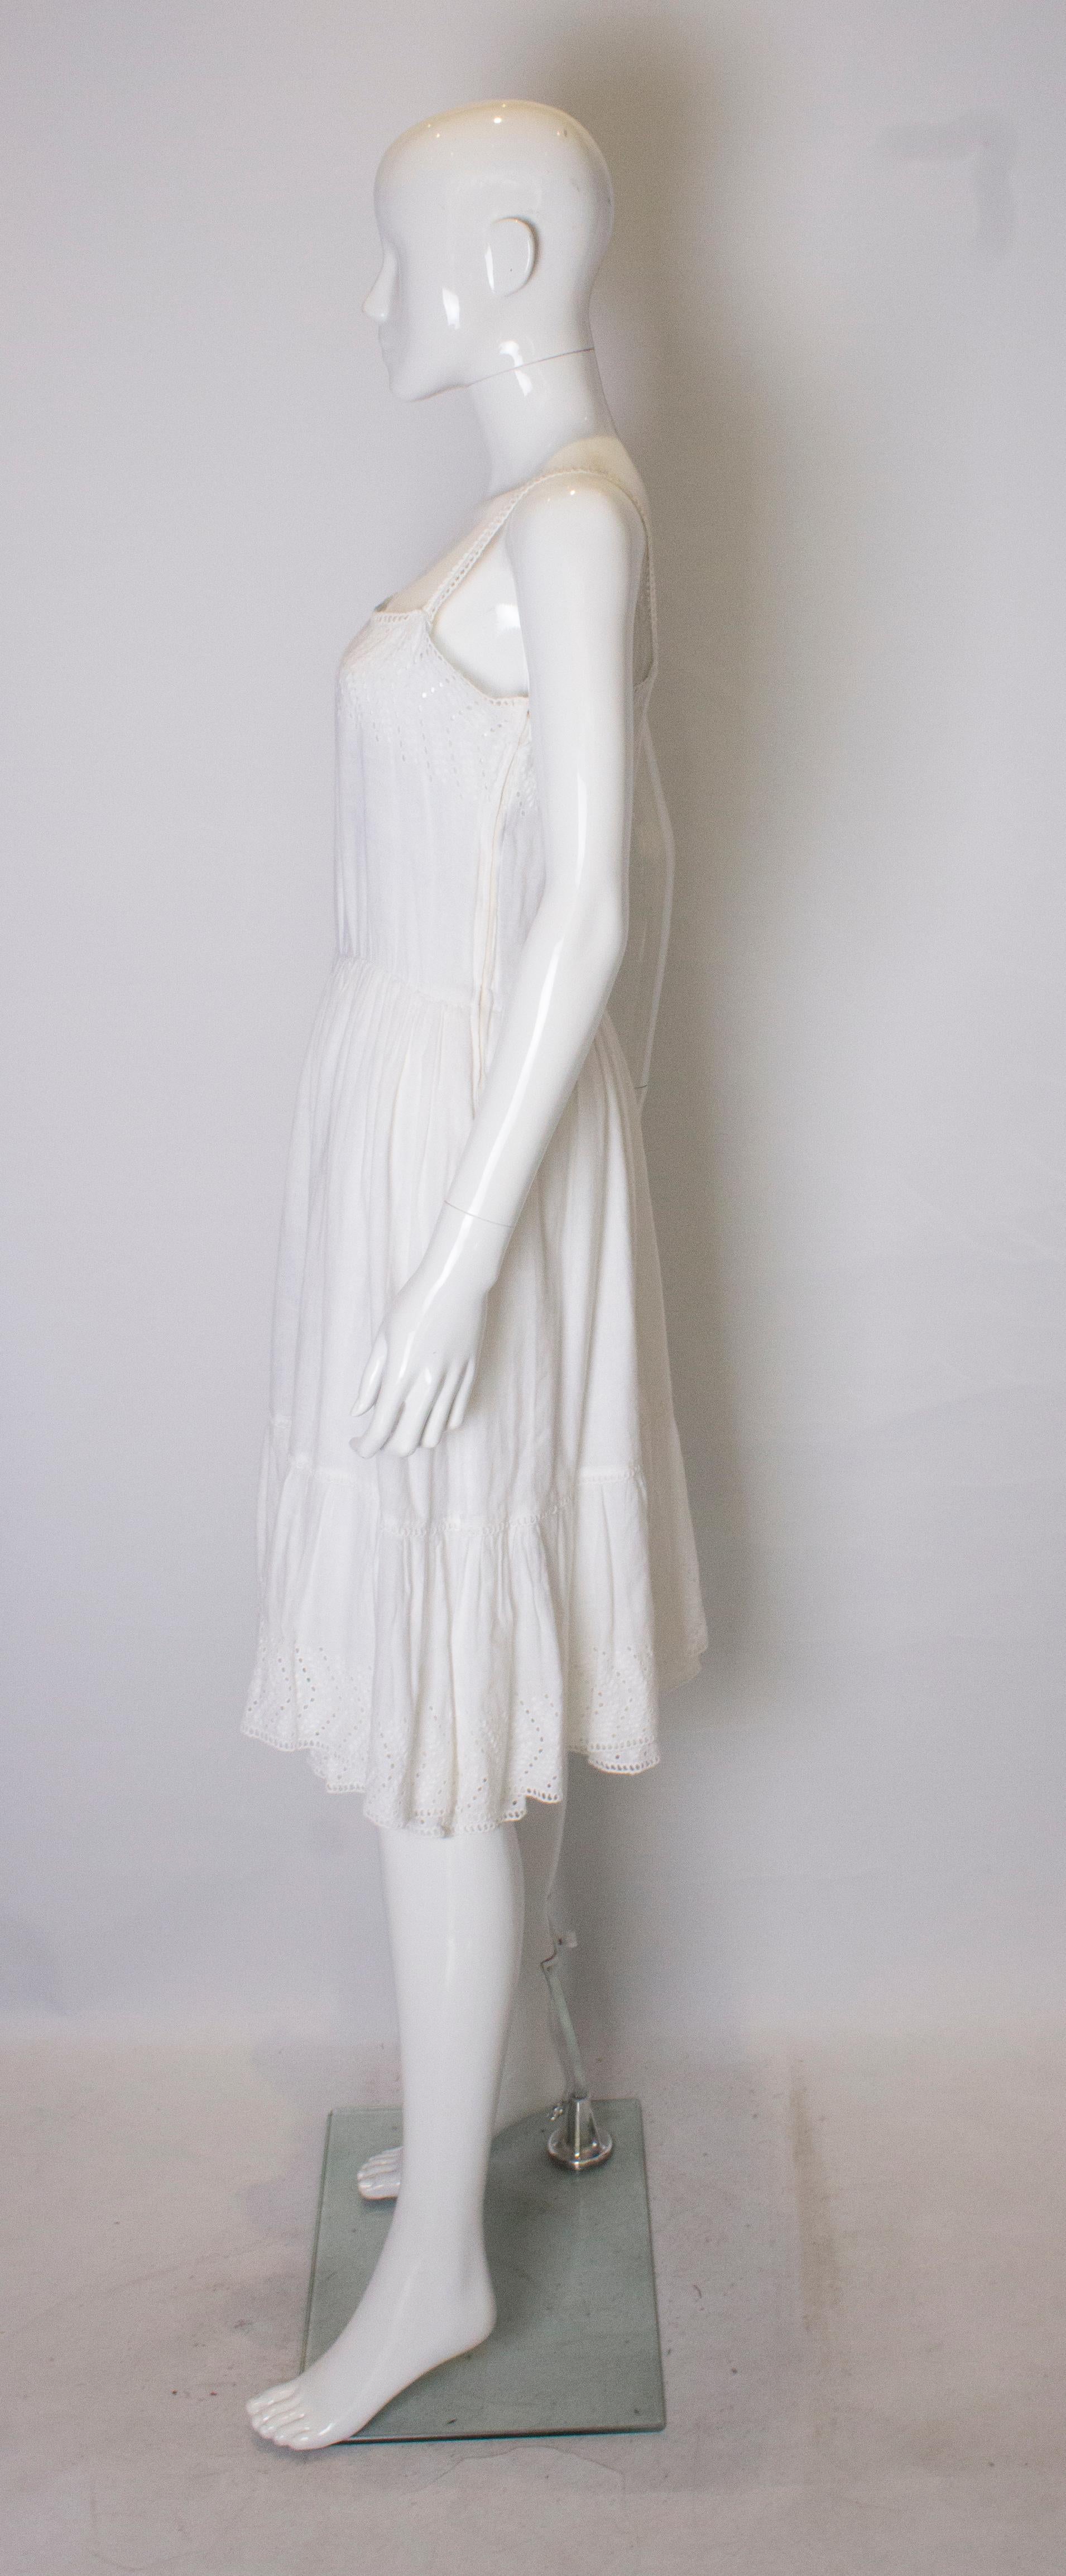 Vintage Louis Feraud White Cotton Dress In Good Condition For Sale In London, GB